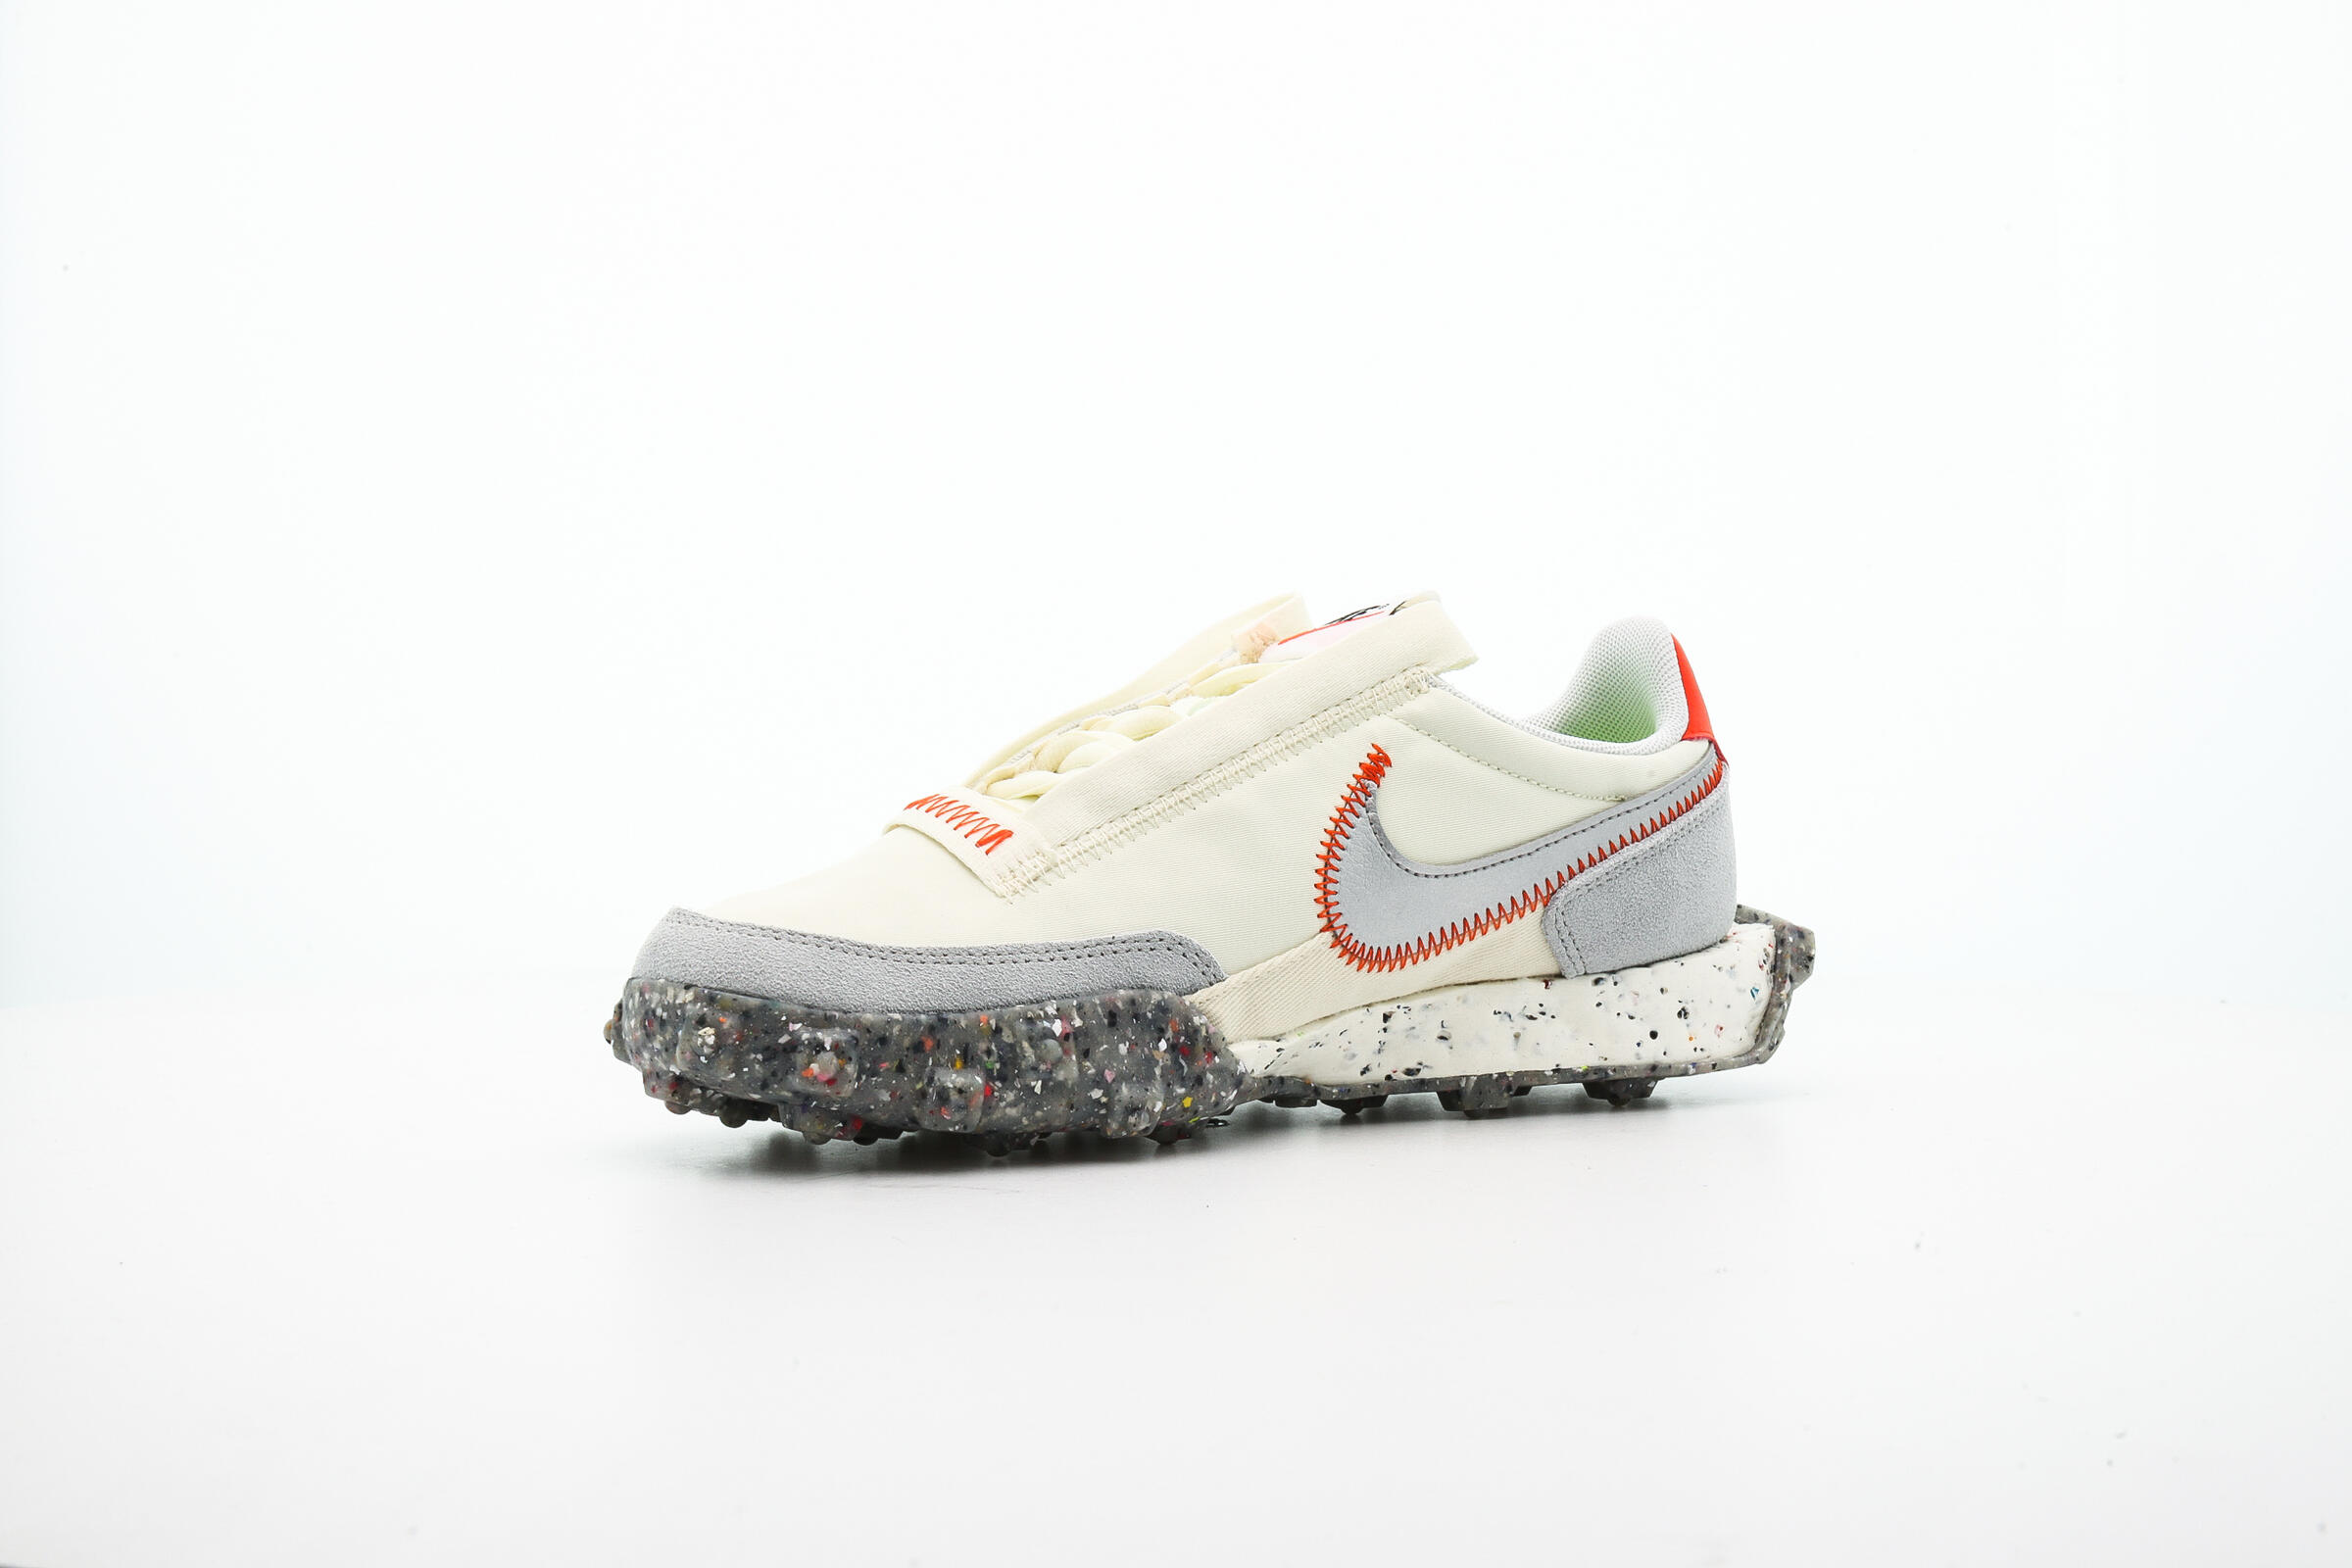 Nike WAFFLE RACER CRATER "COCONUT MILK"